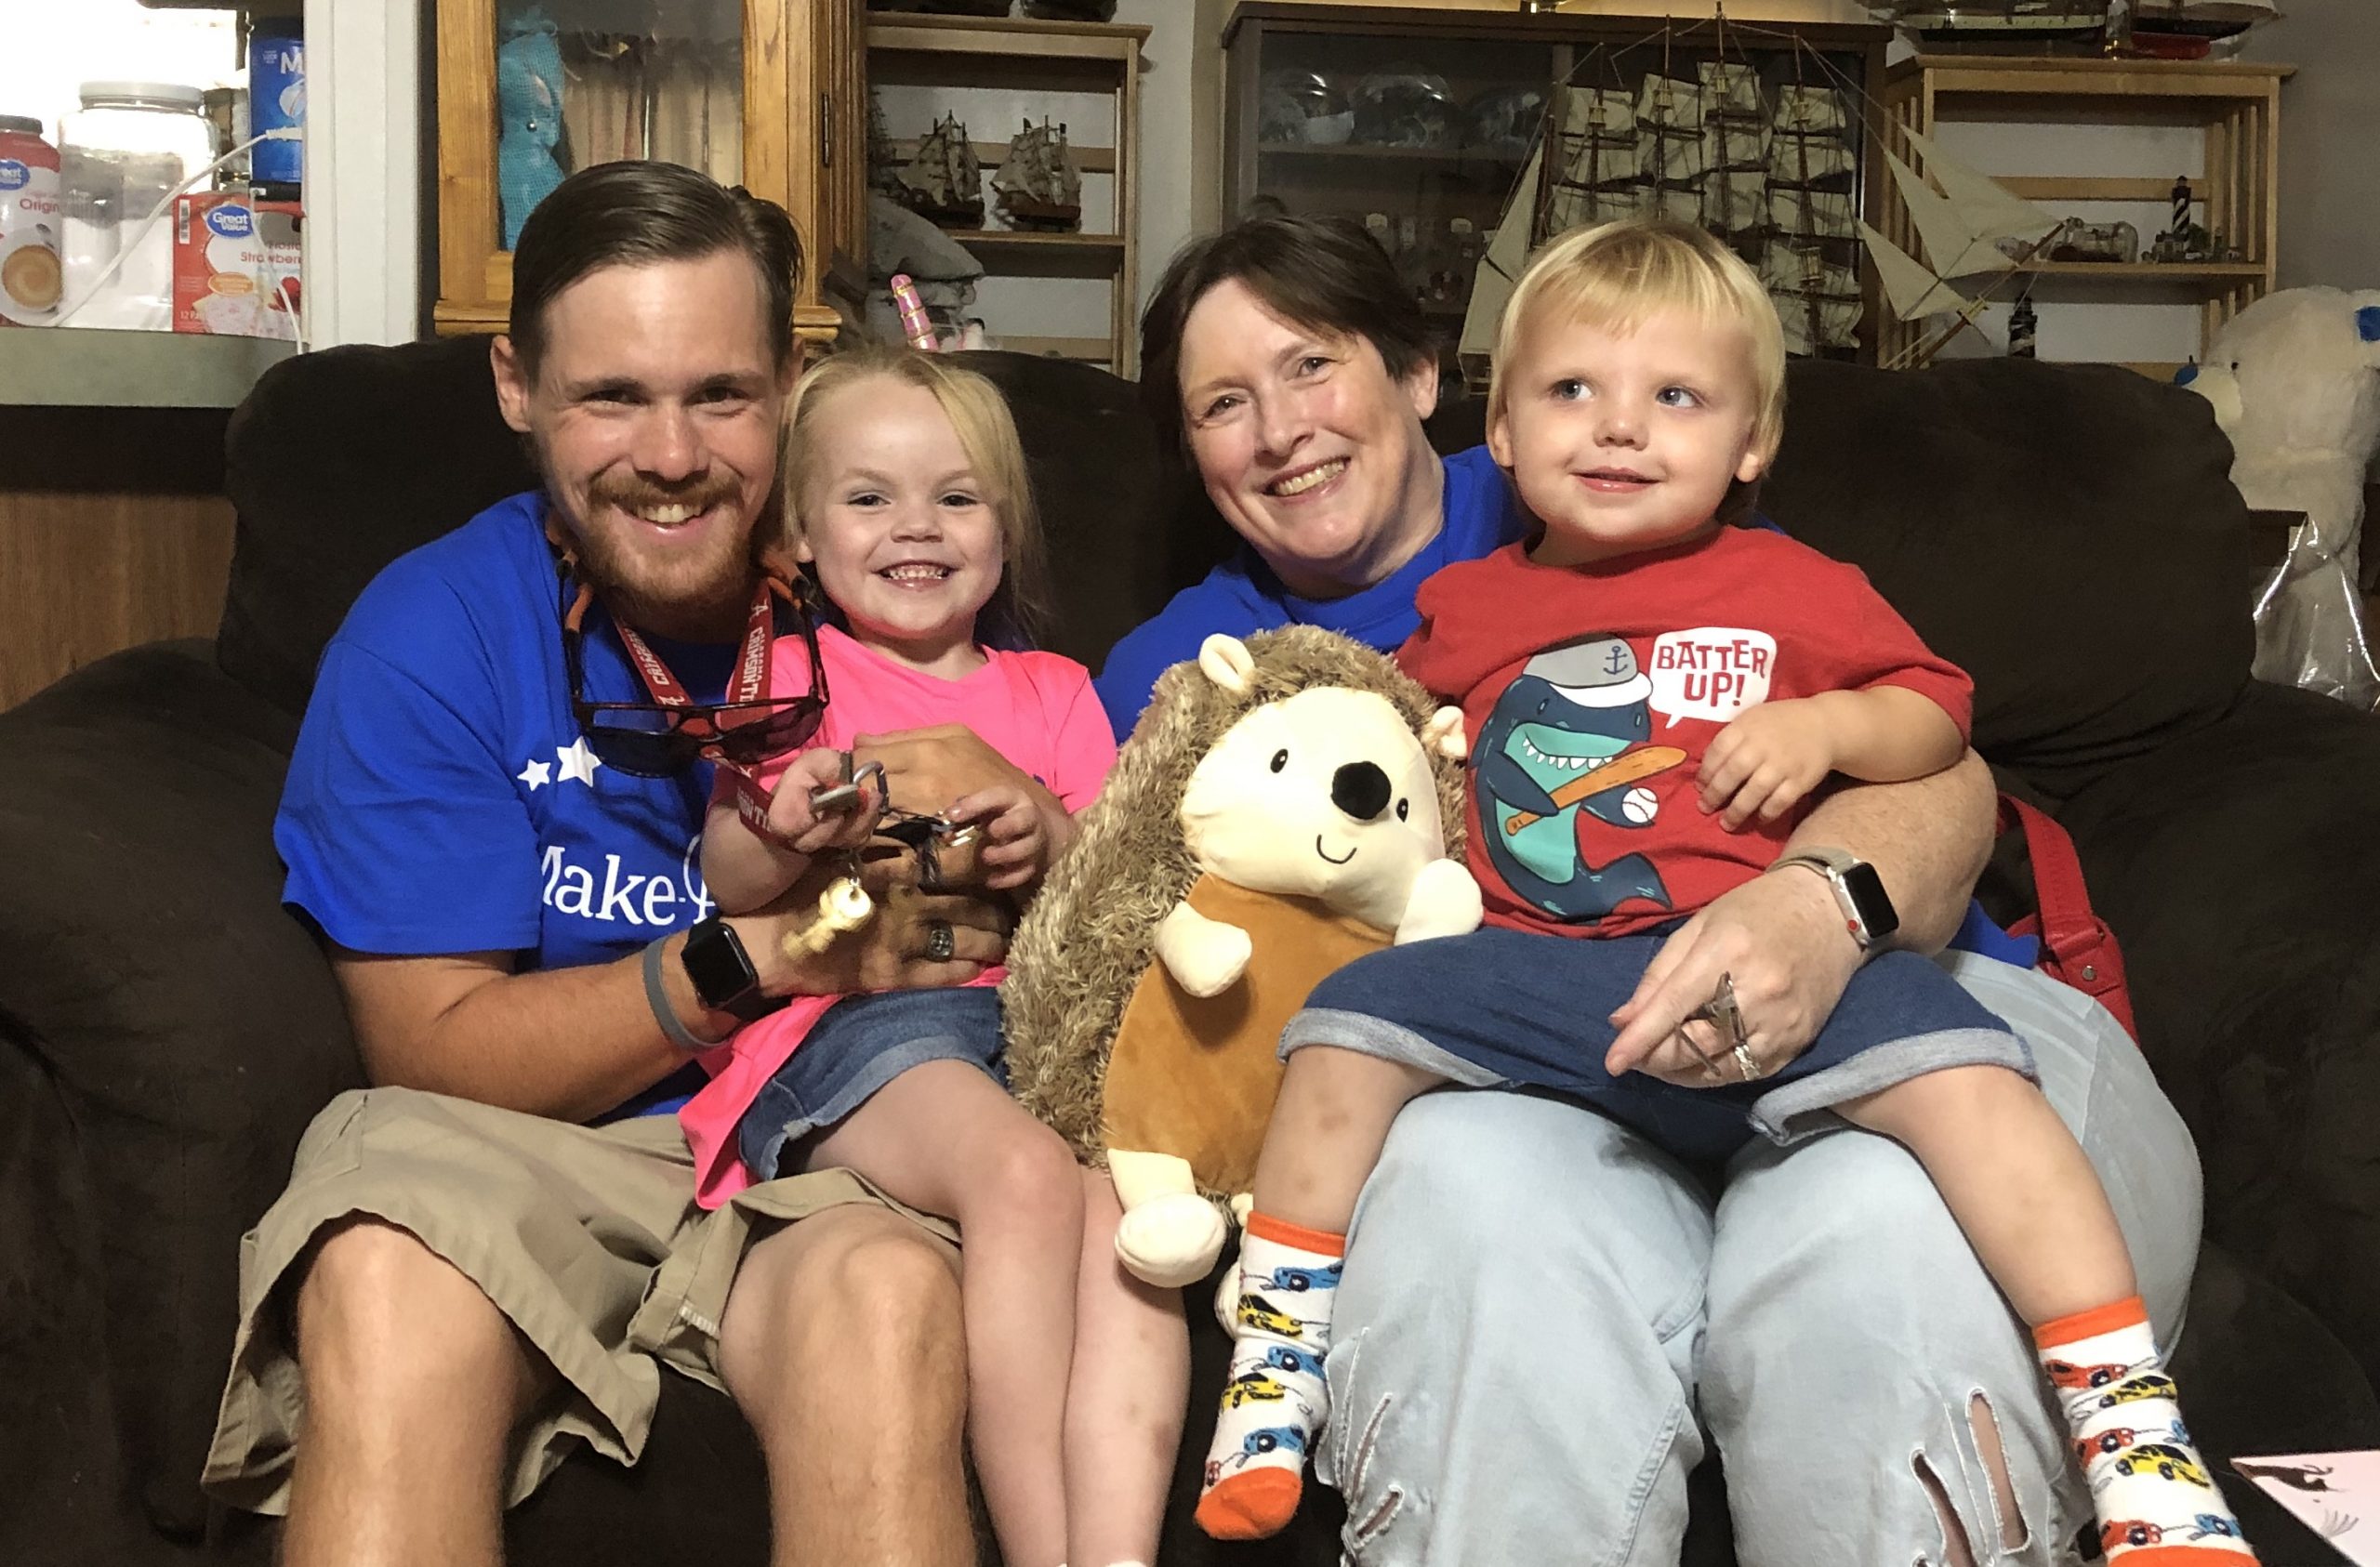 Trussville resident hikes 26 miles for Make-A-Wish Alabama